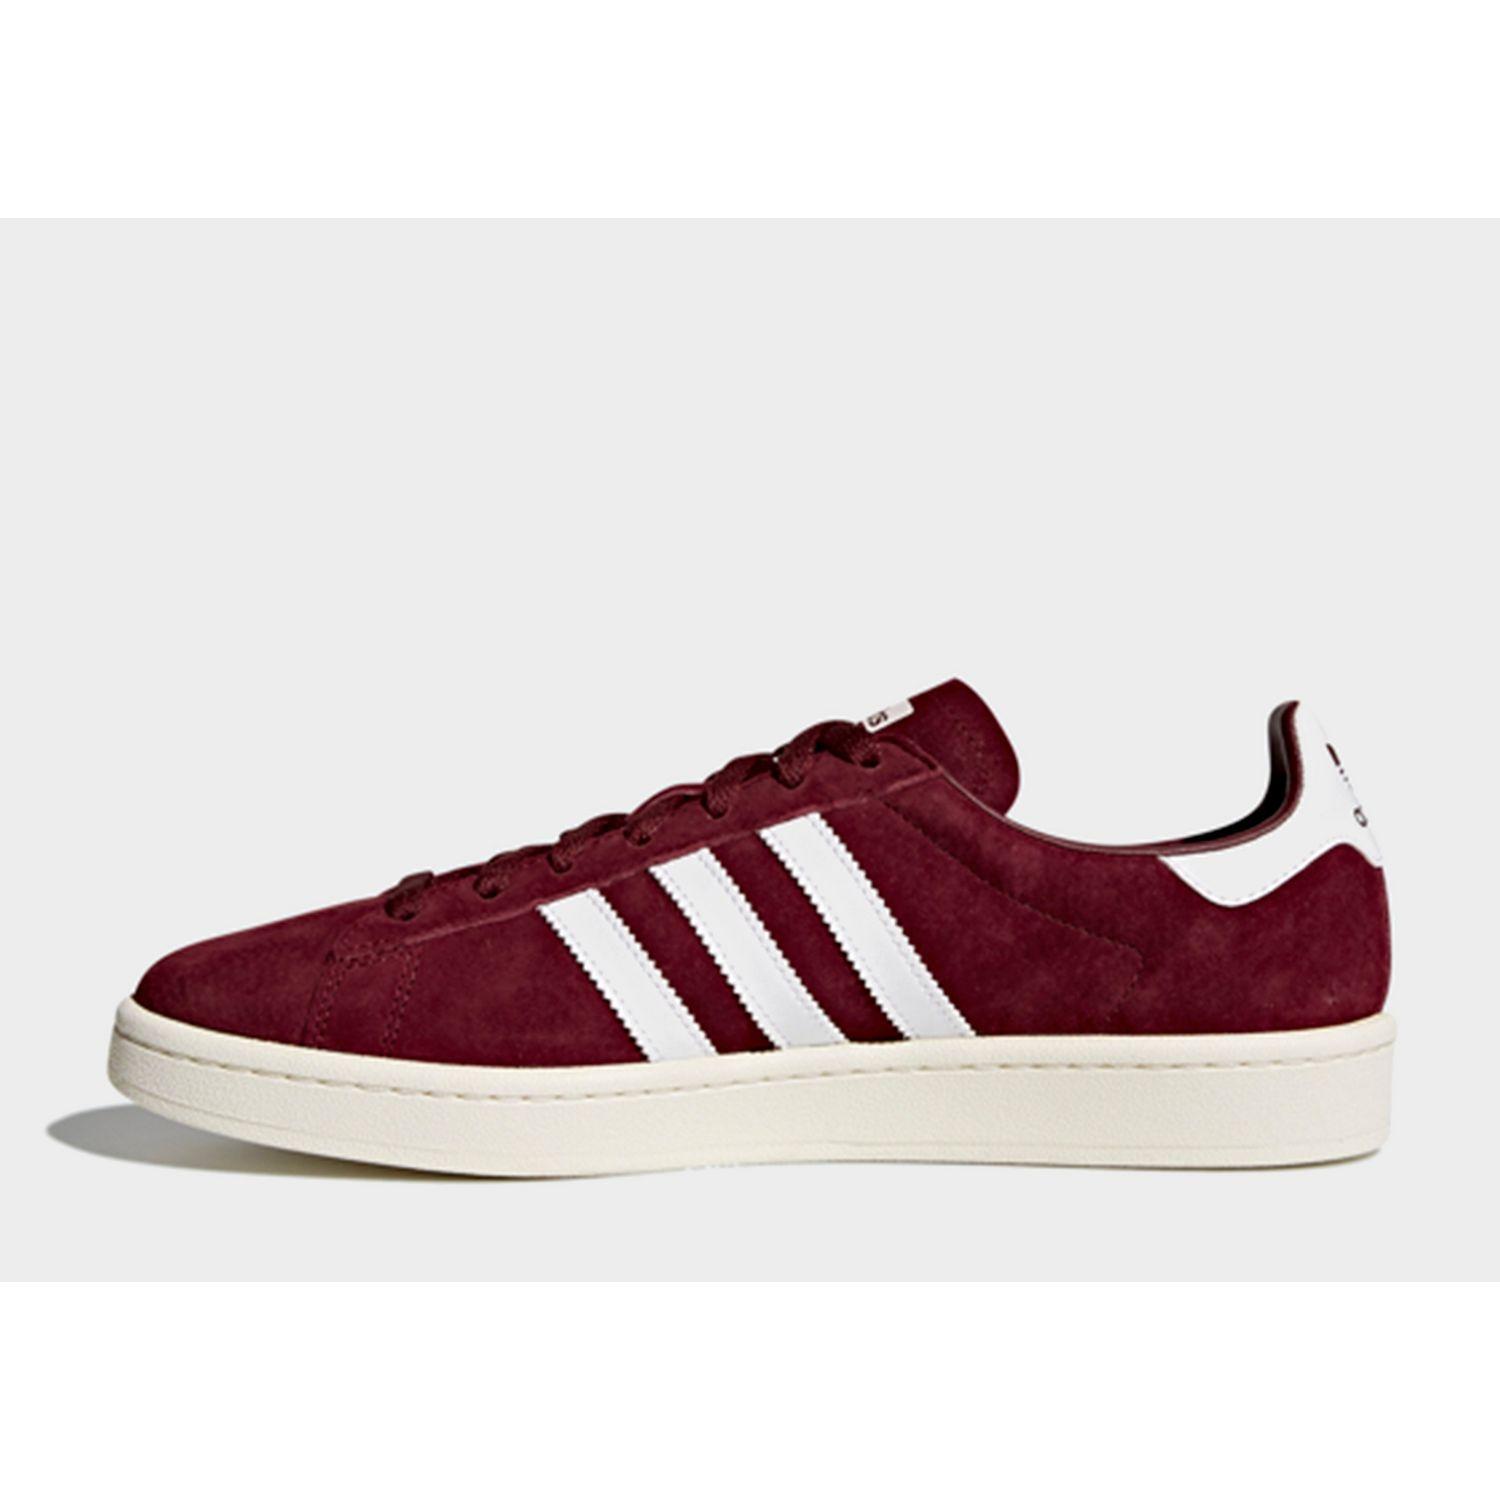 adidas Campus Shoes in Red - Lyst